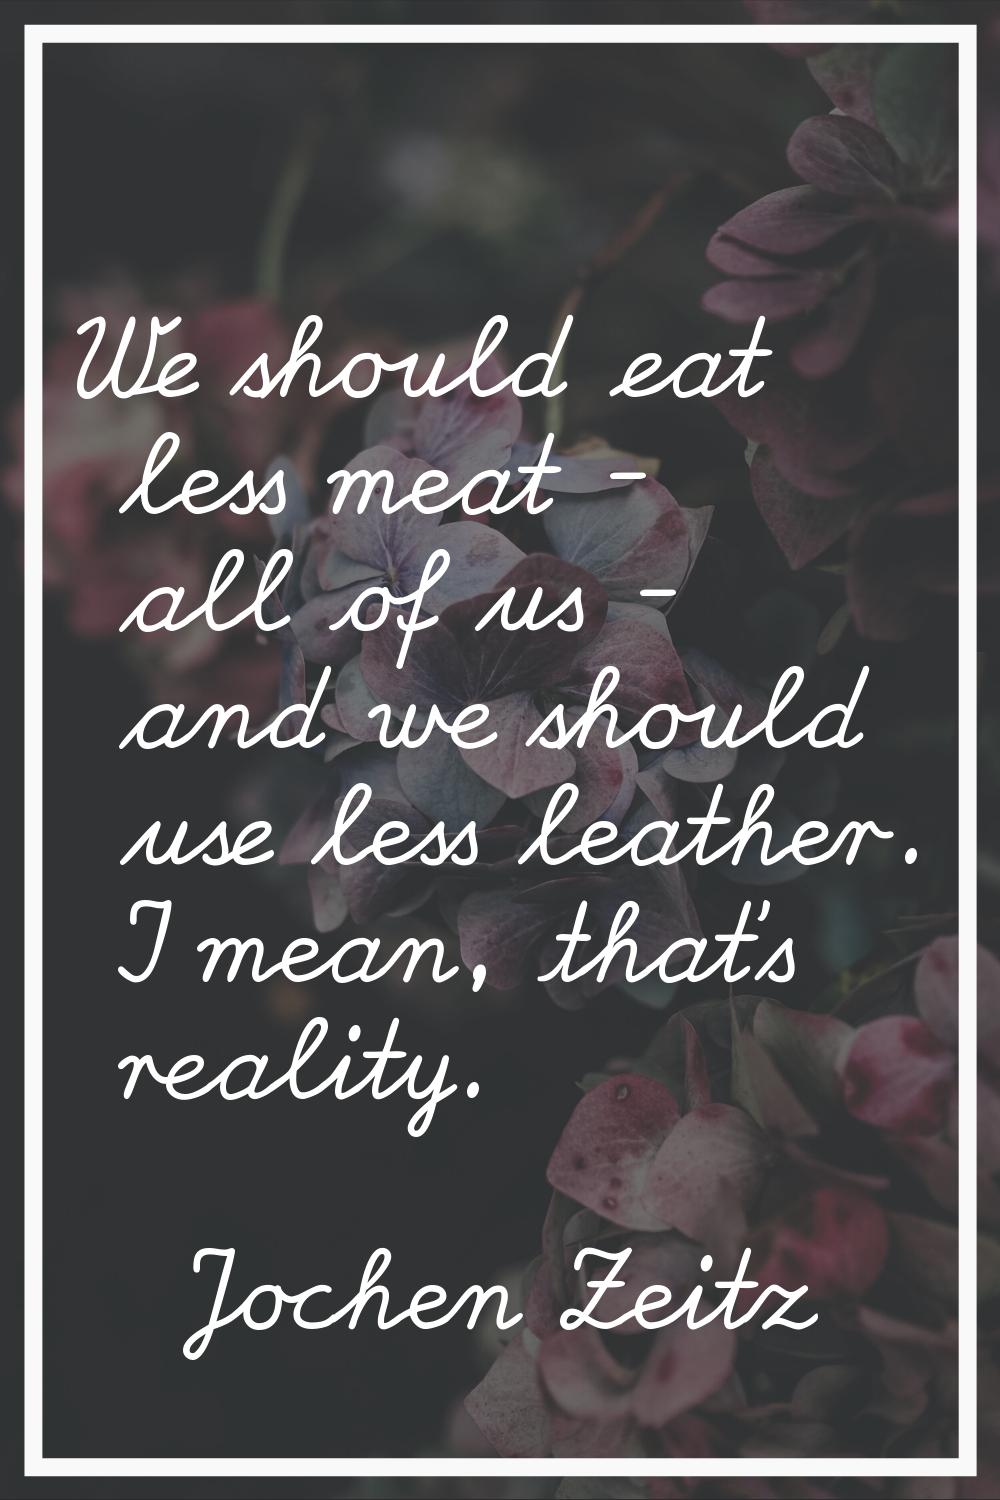 We should eat less meat - all of us - and we should use less leather. I mean, that's reality.